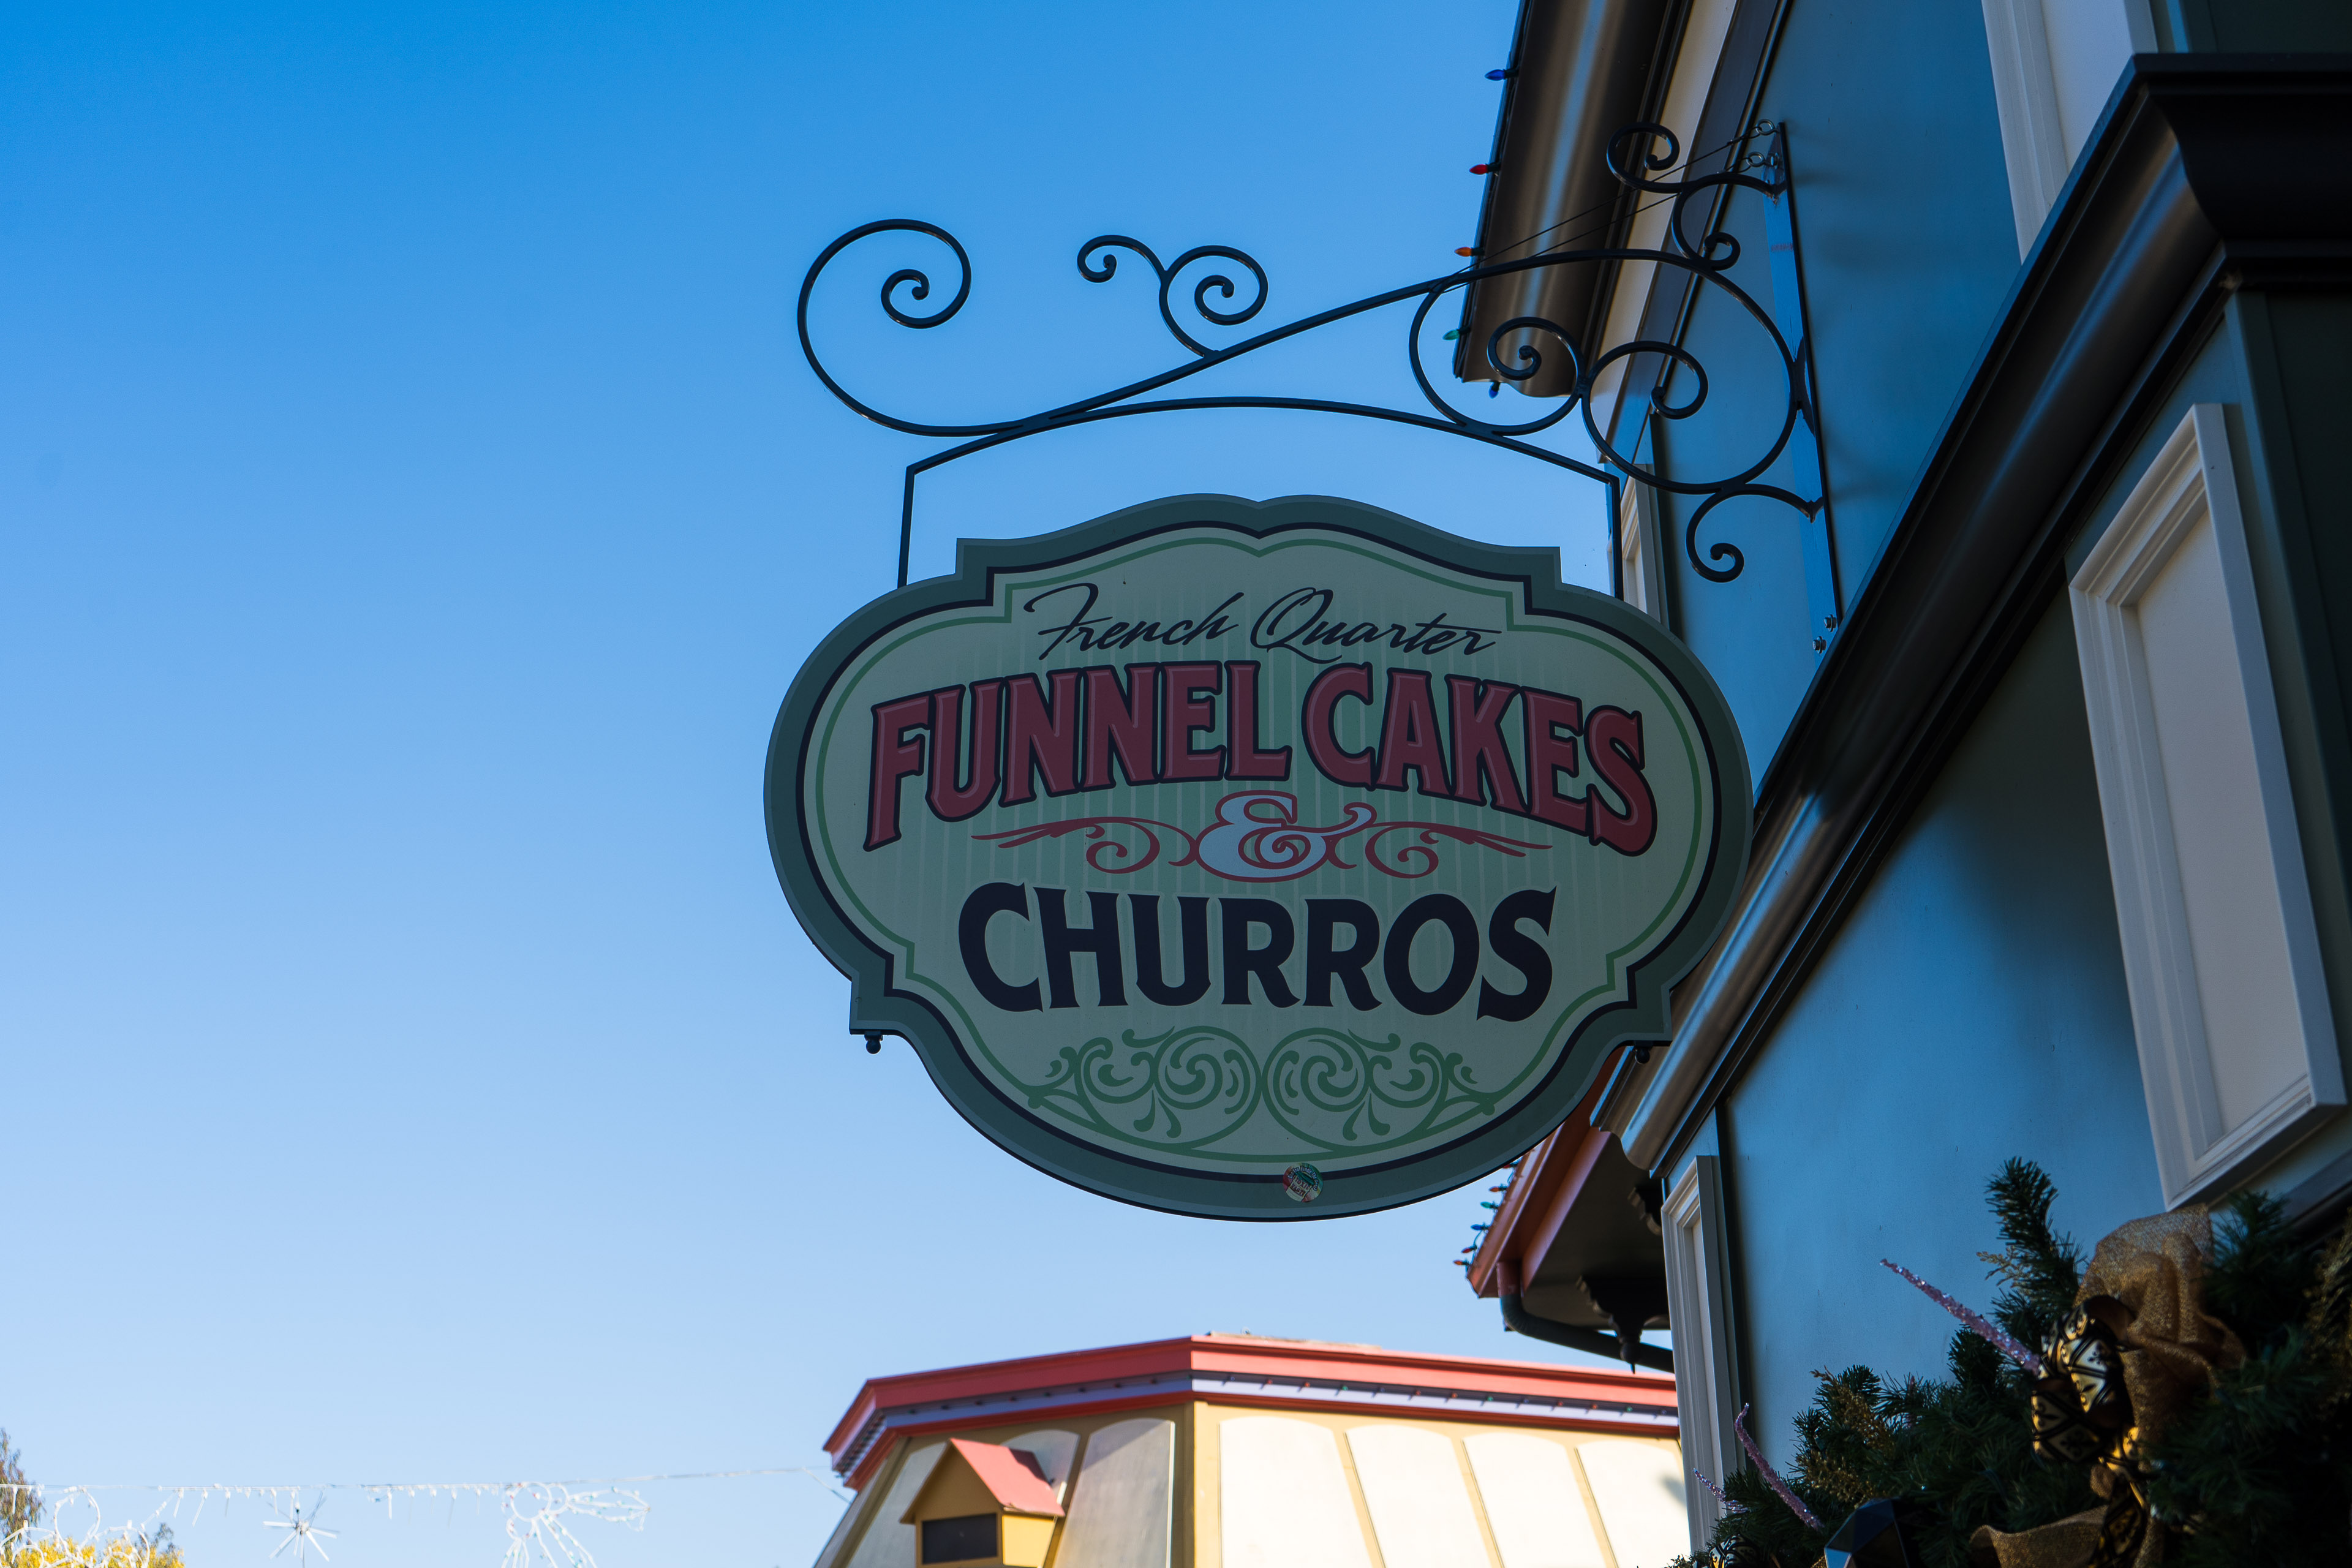 French Quarter Funnel Cakes and Churros